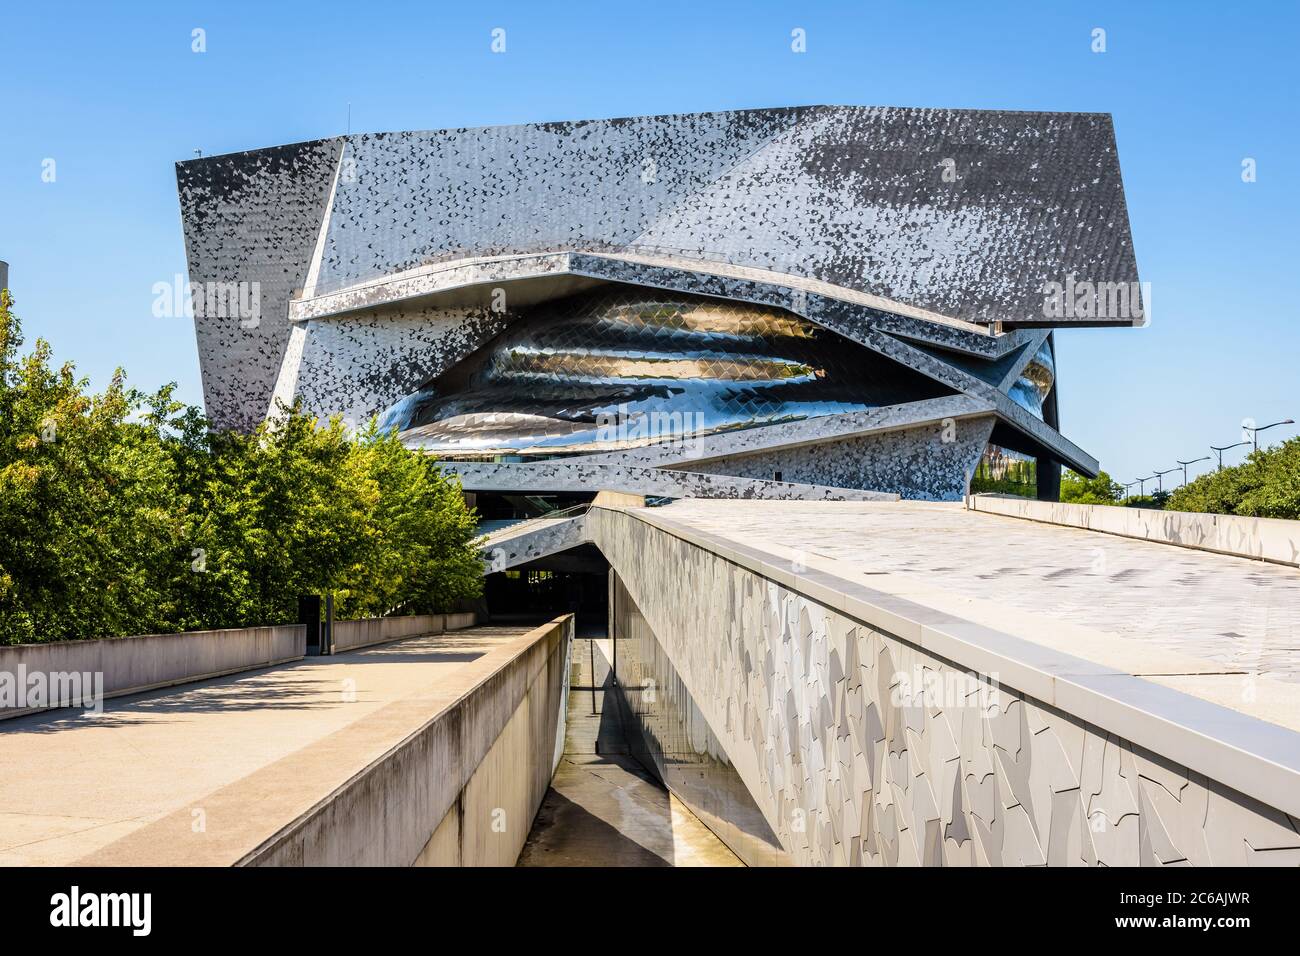 The Philharmonie de Paris concert hall, by french architect Jean Nouvel and  built in 2015 in the Parc de la Villette, seen from the access ramp Stock  Photo - Alamy